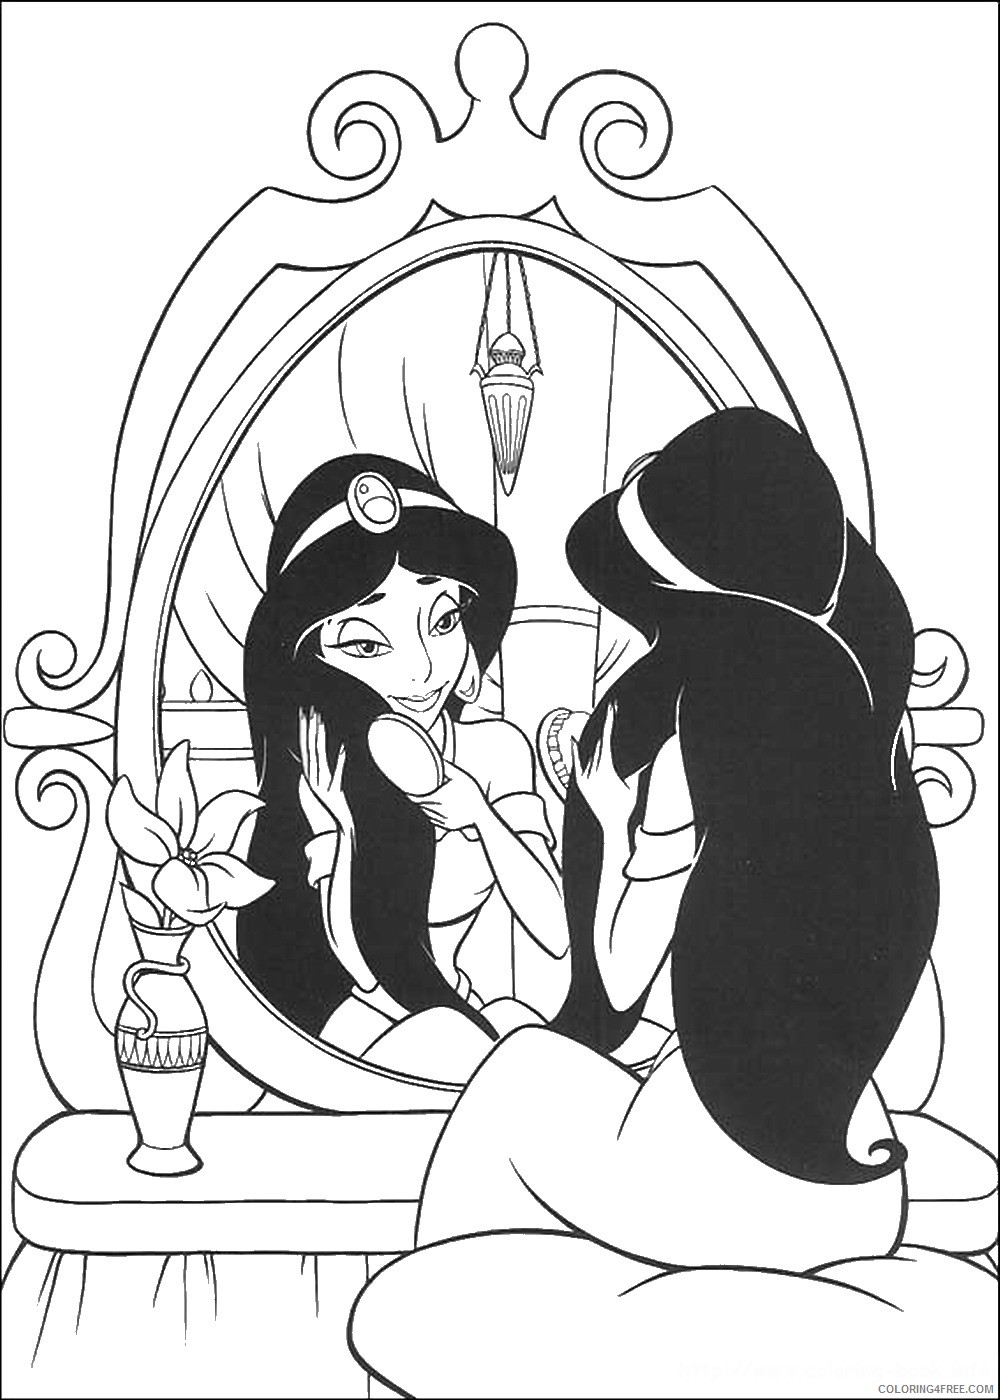 Aladdin Coloring Pages Cartoons aladdin_21 Printable 2020 0299 Coloring4free